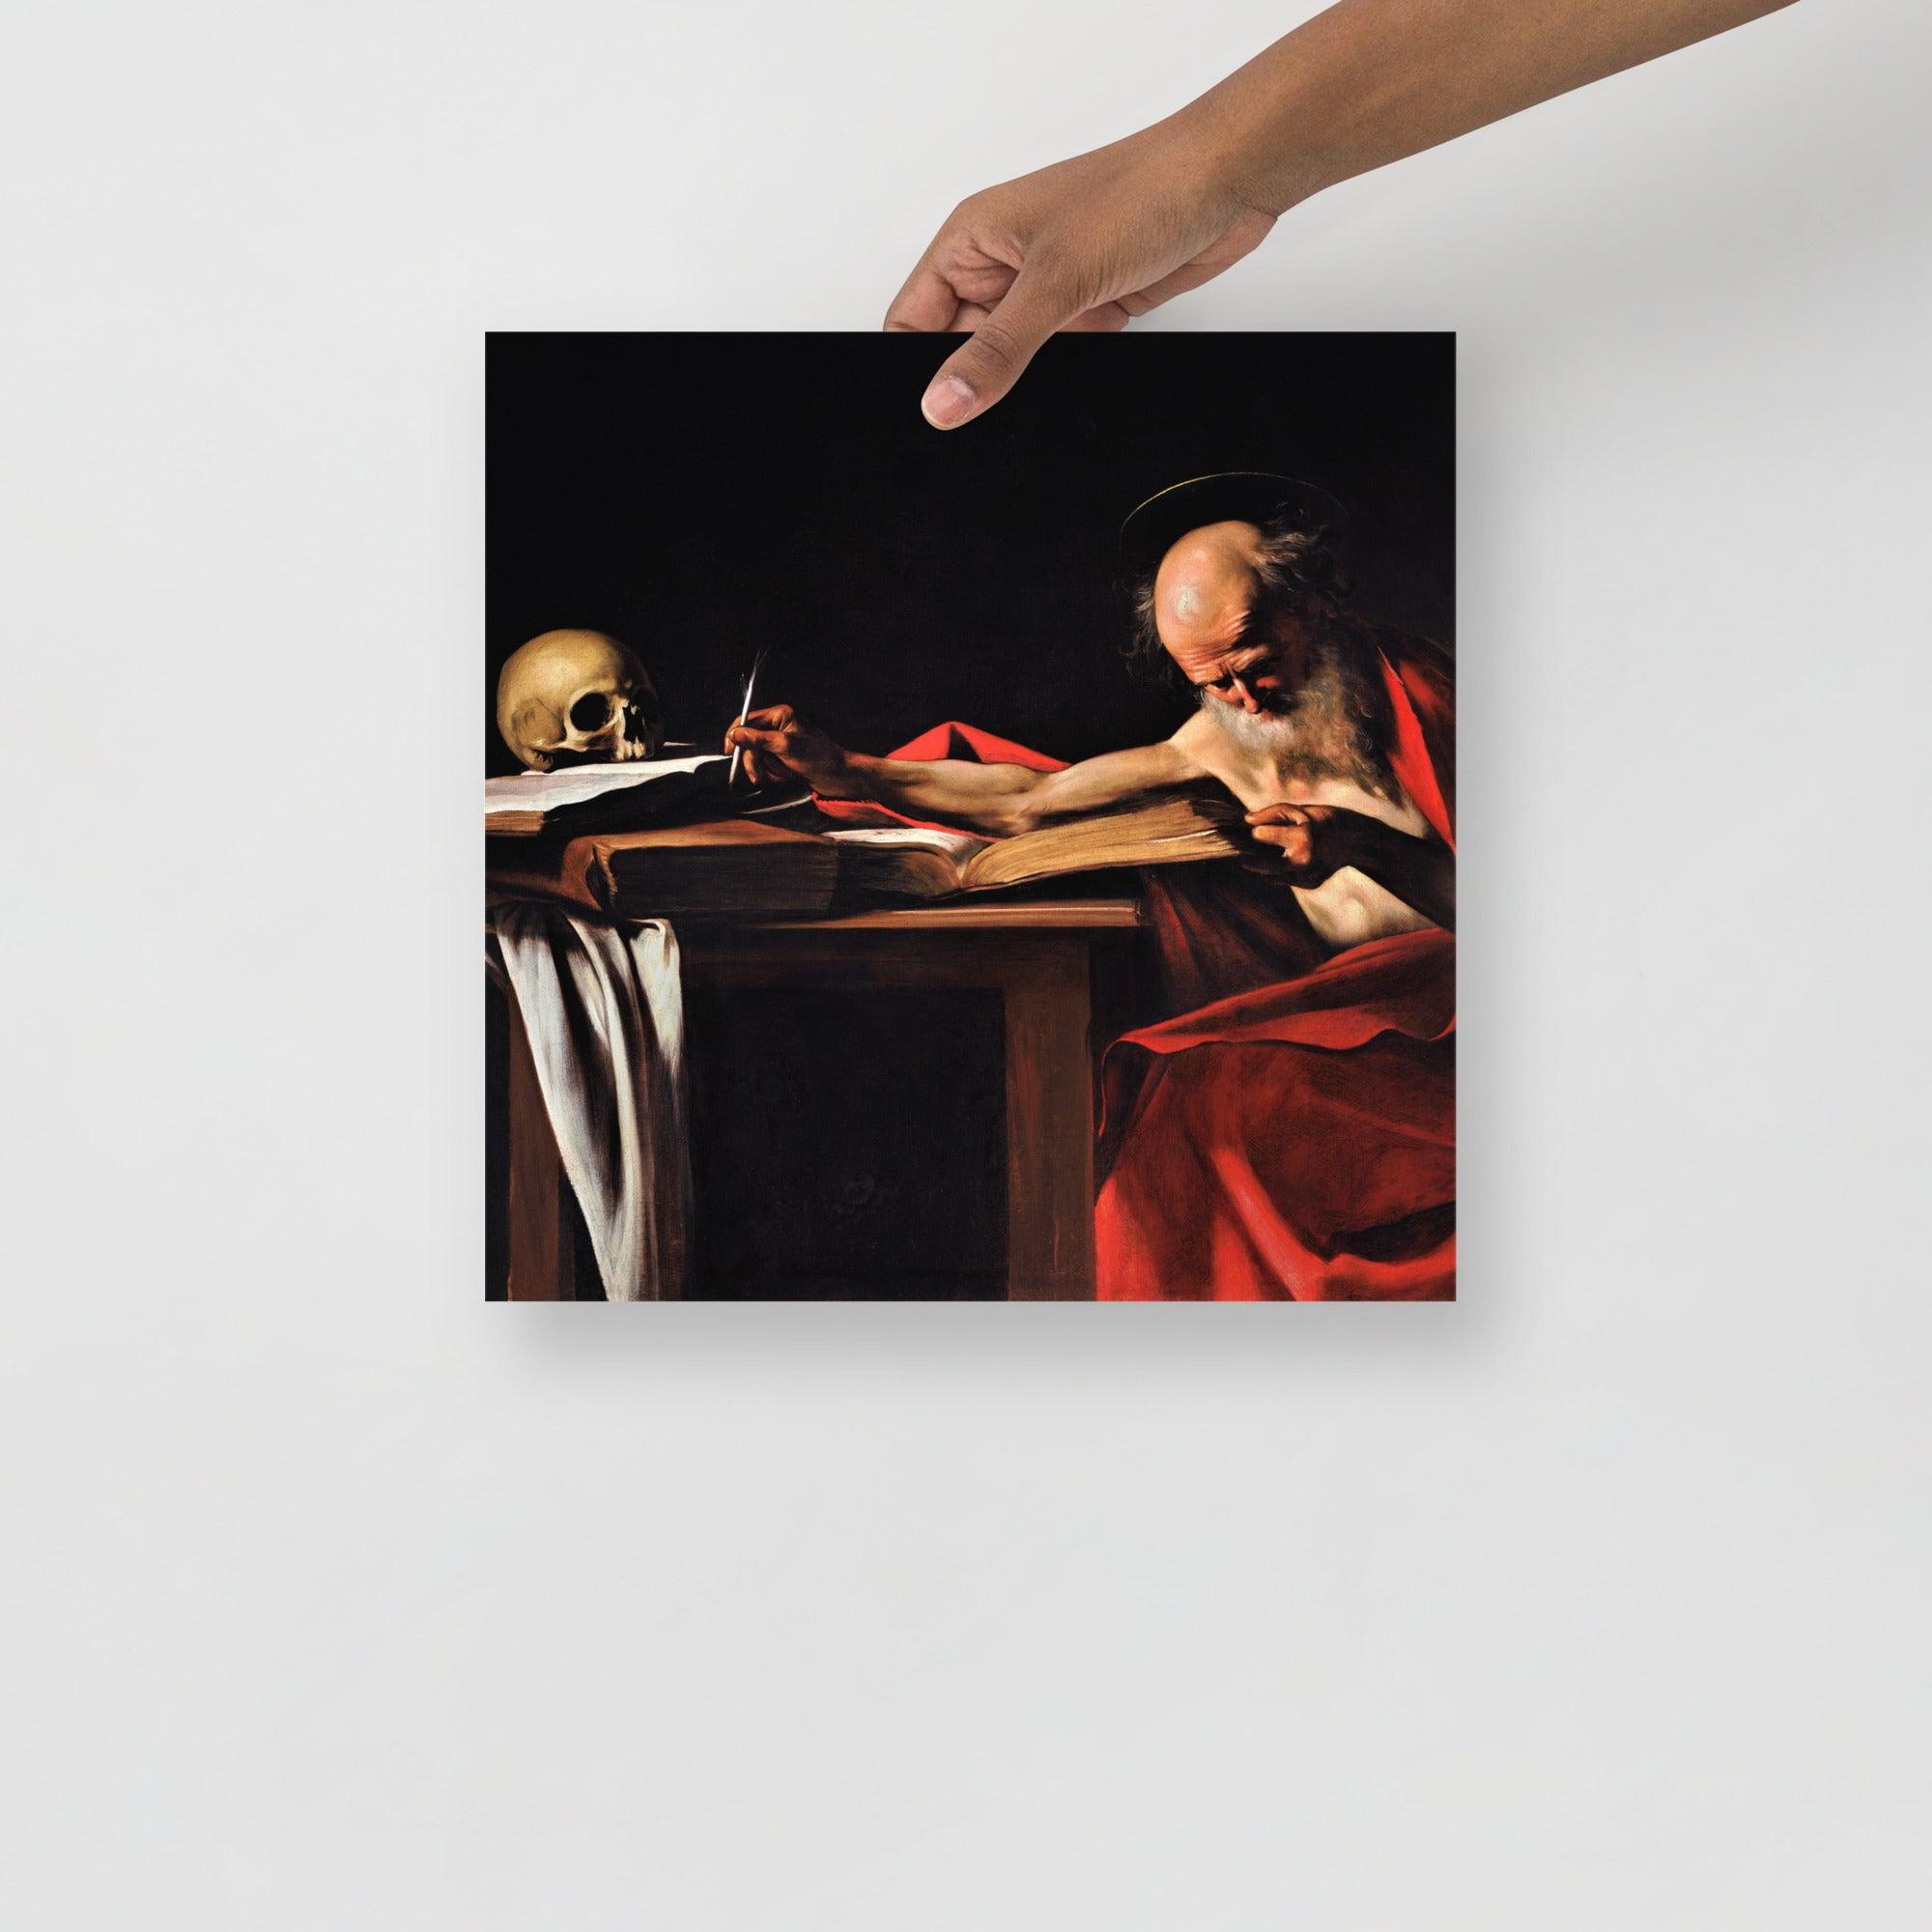 A Saint Jerome Writing by Caravaggio poster on a plain backdrop in size 14x14”.